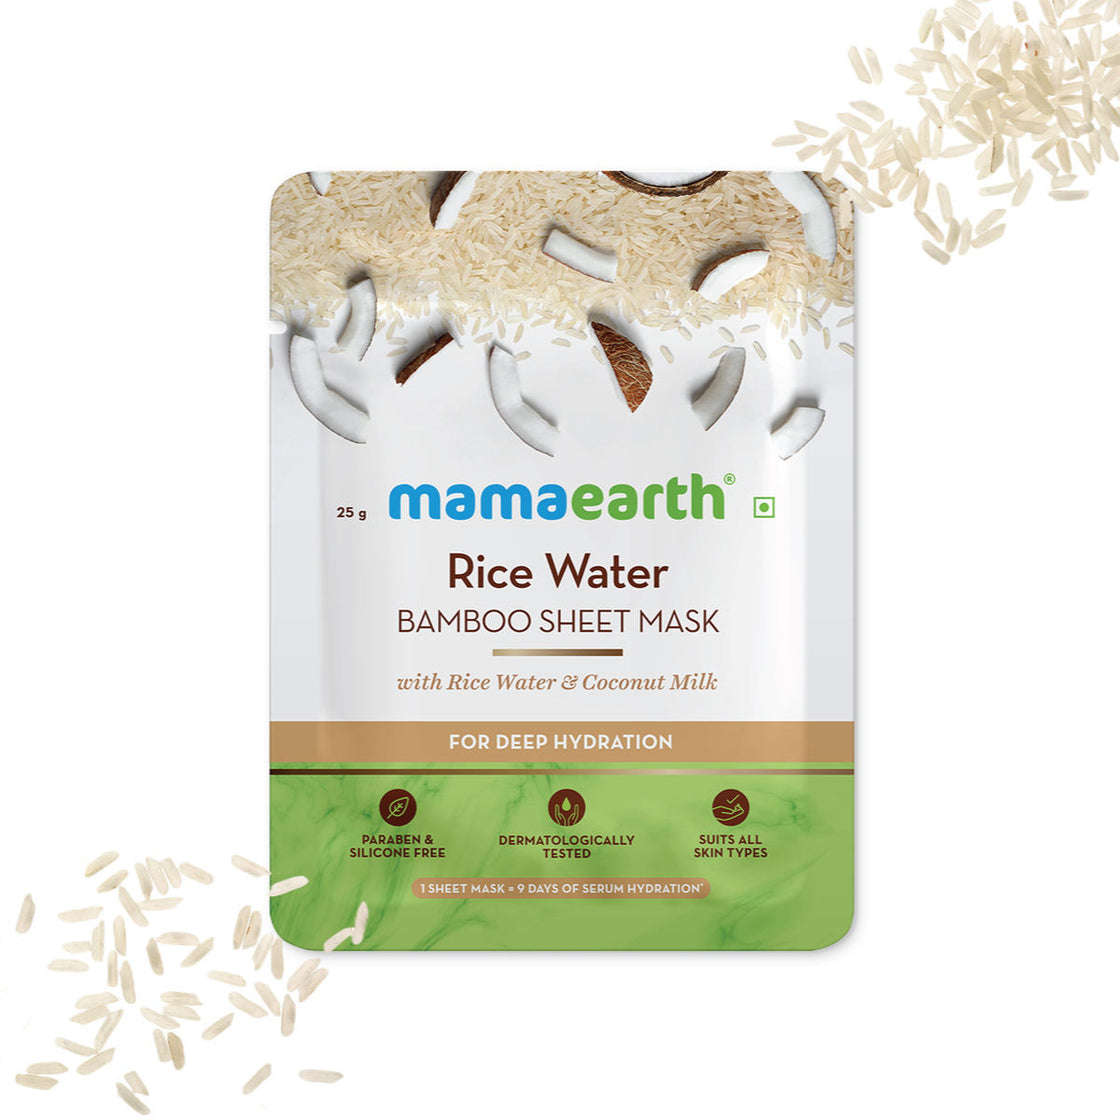 Mamaearth Rice Water Bamboo Sheet Mask With Rice Water & Coconut Milk For Deep Hydration - 25 G